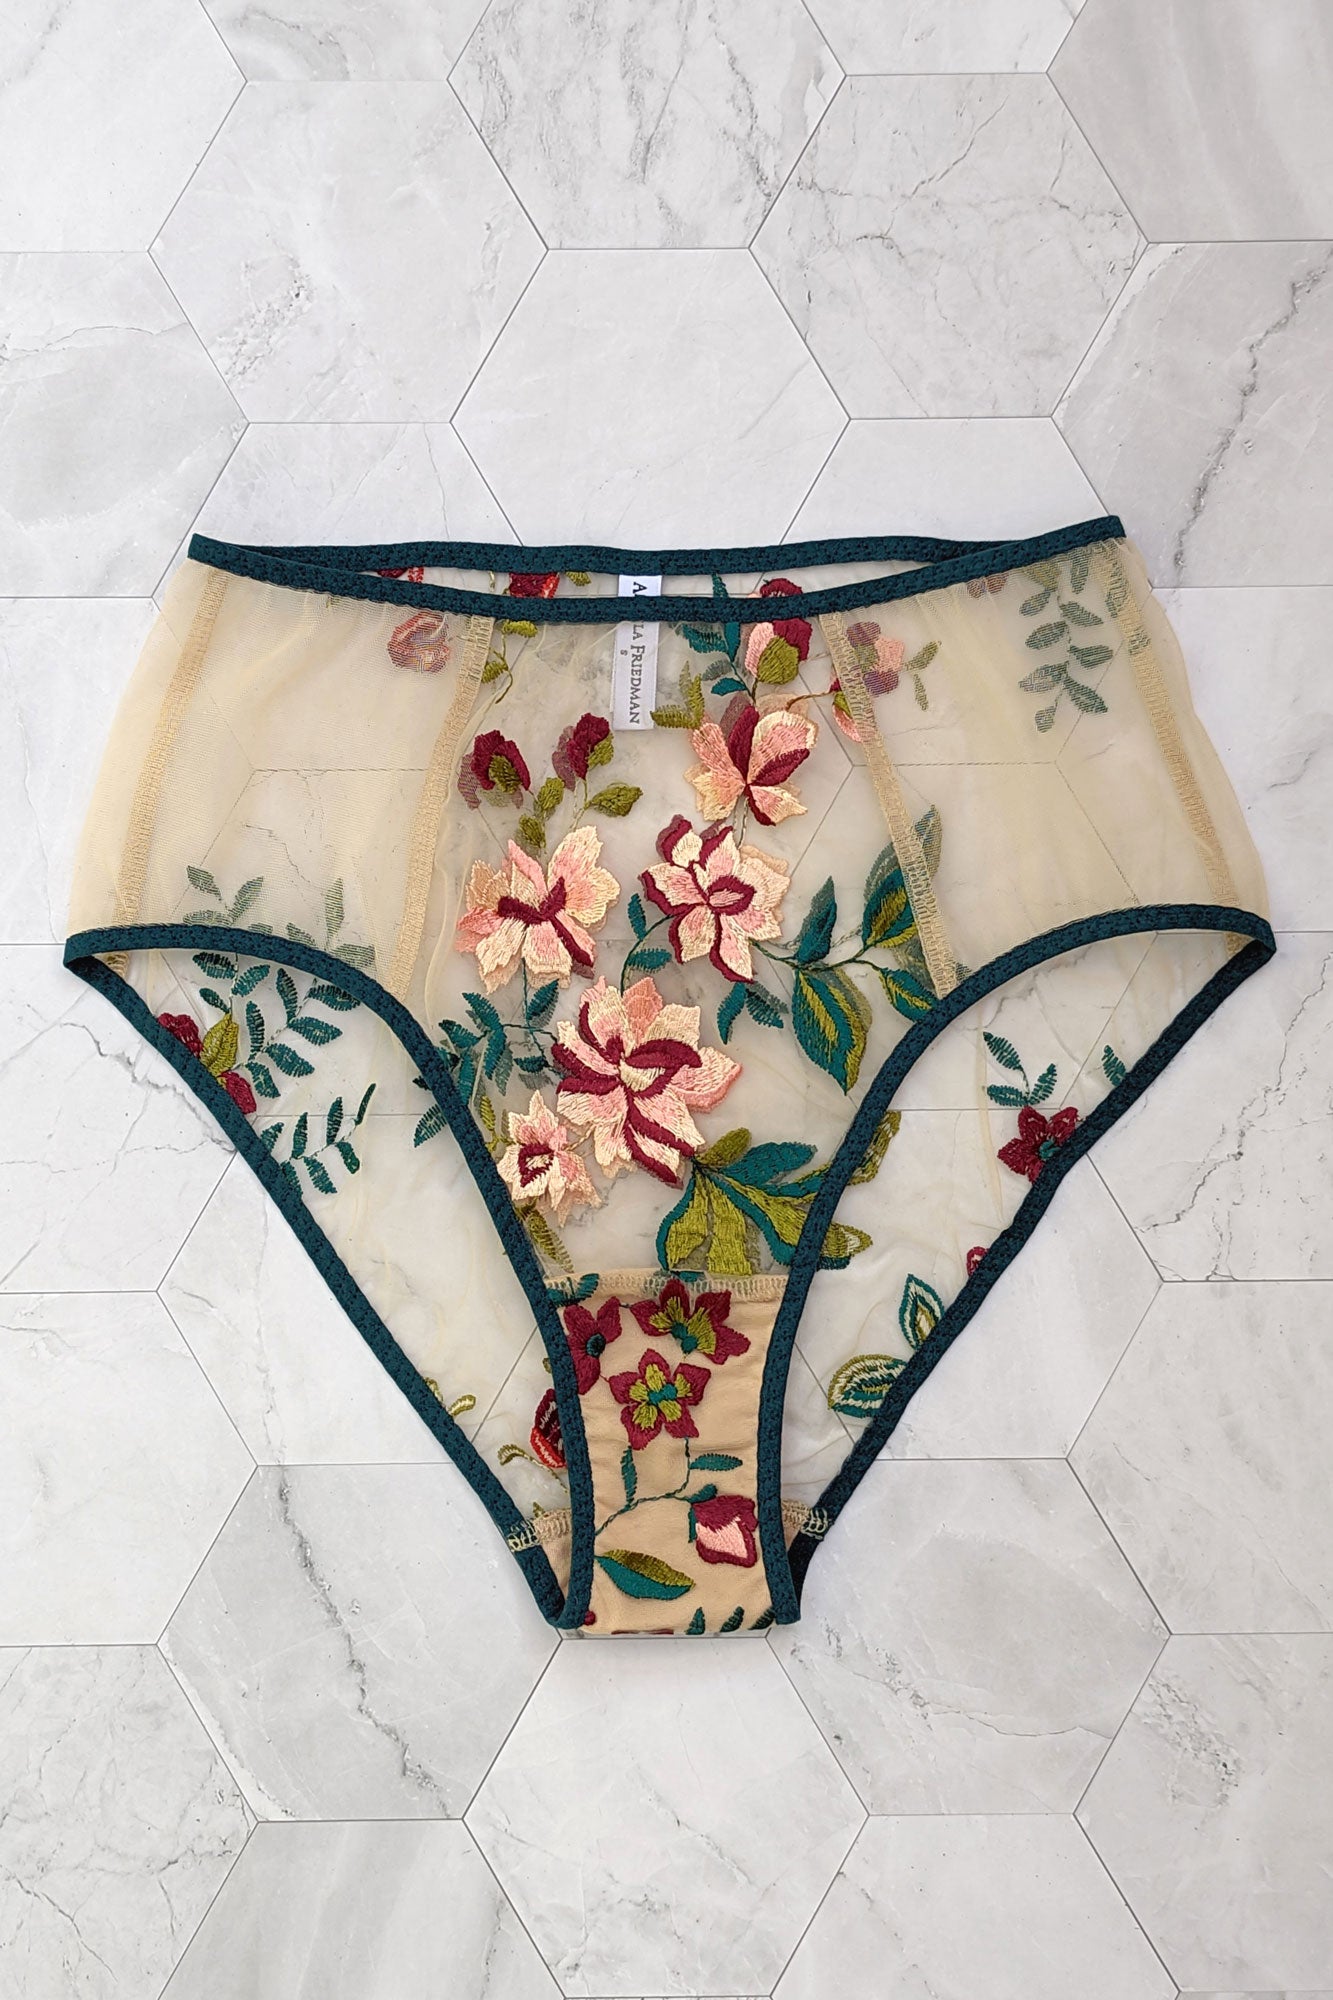 Embroidered Floral Panties, Sheer, Bikini Cut Panties, Mesh, Embroidered  Lingerie, Boudoir Lingerie, Floral Print, Embroidery -  Canada